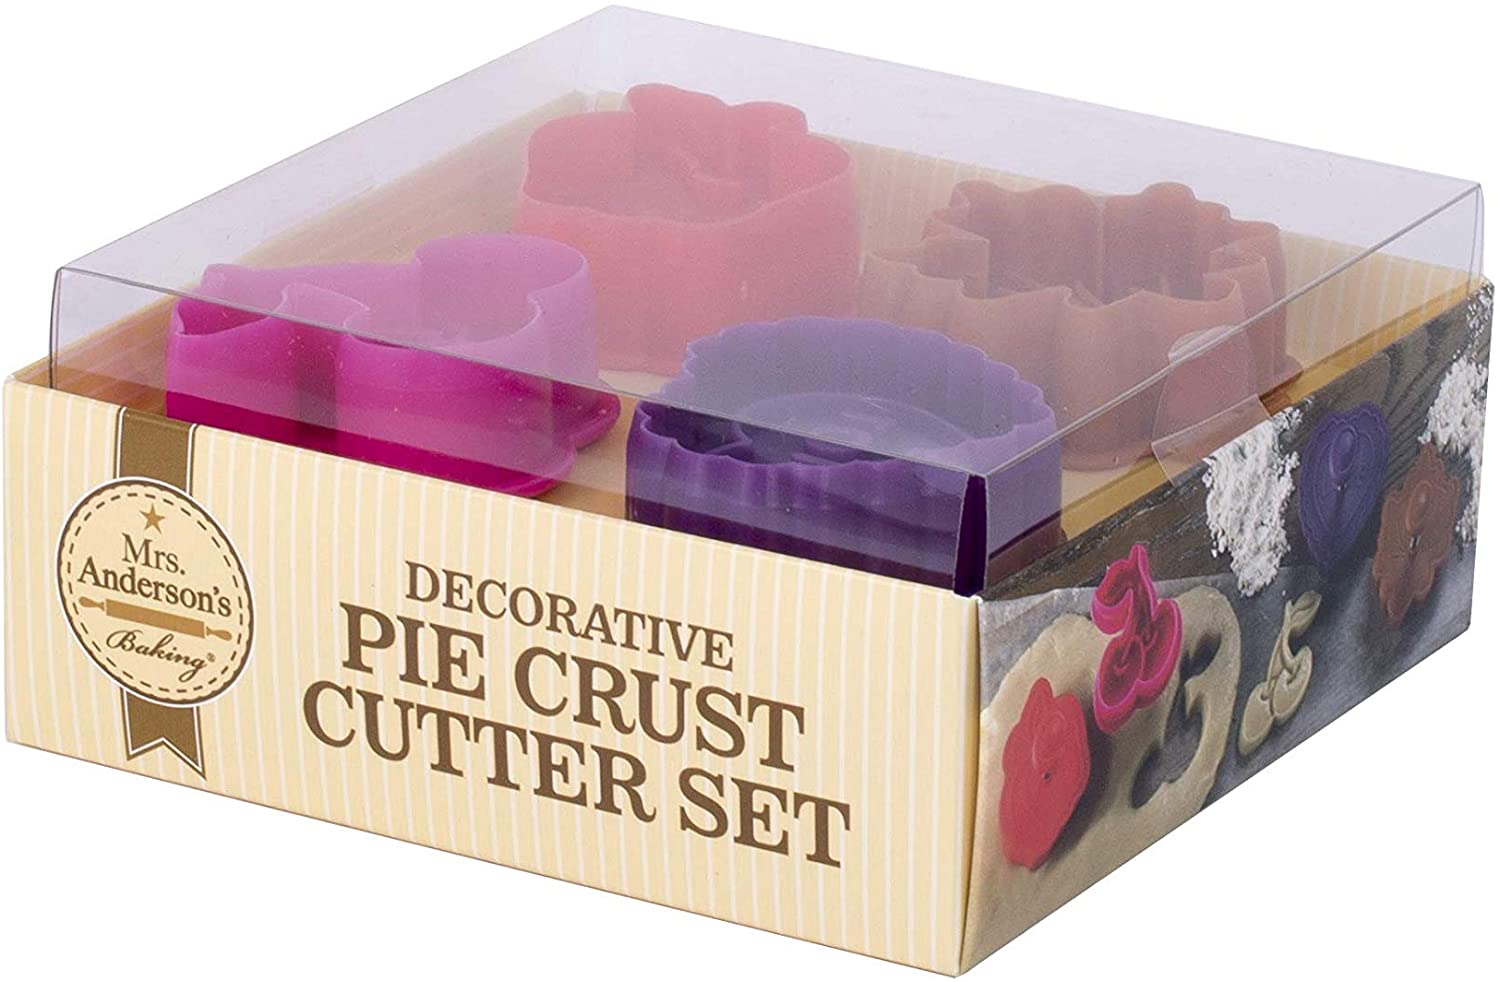 Mrs. Anderson's Baking Pie Crust Cutters 4 pack